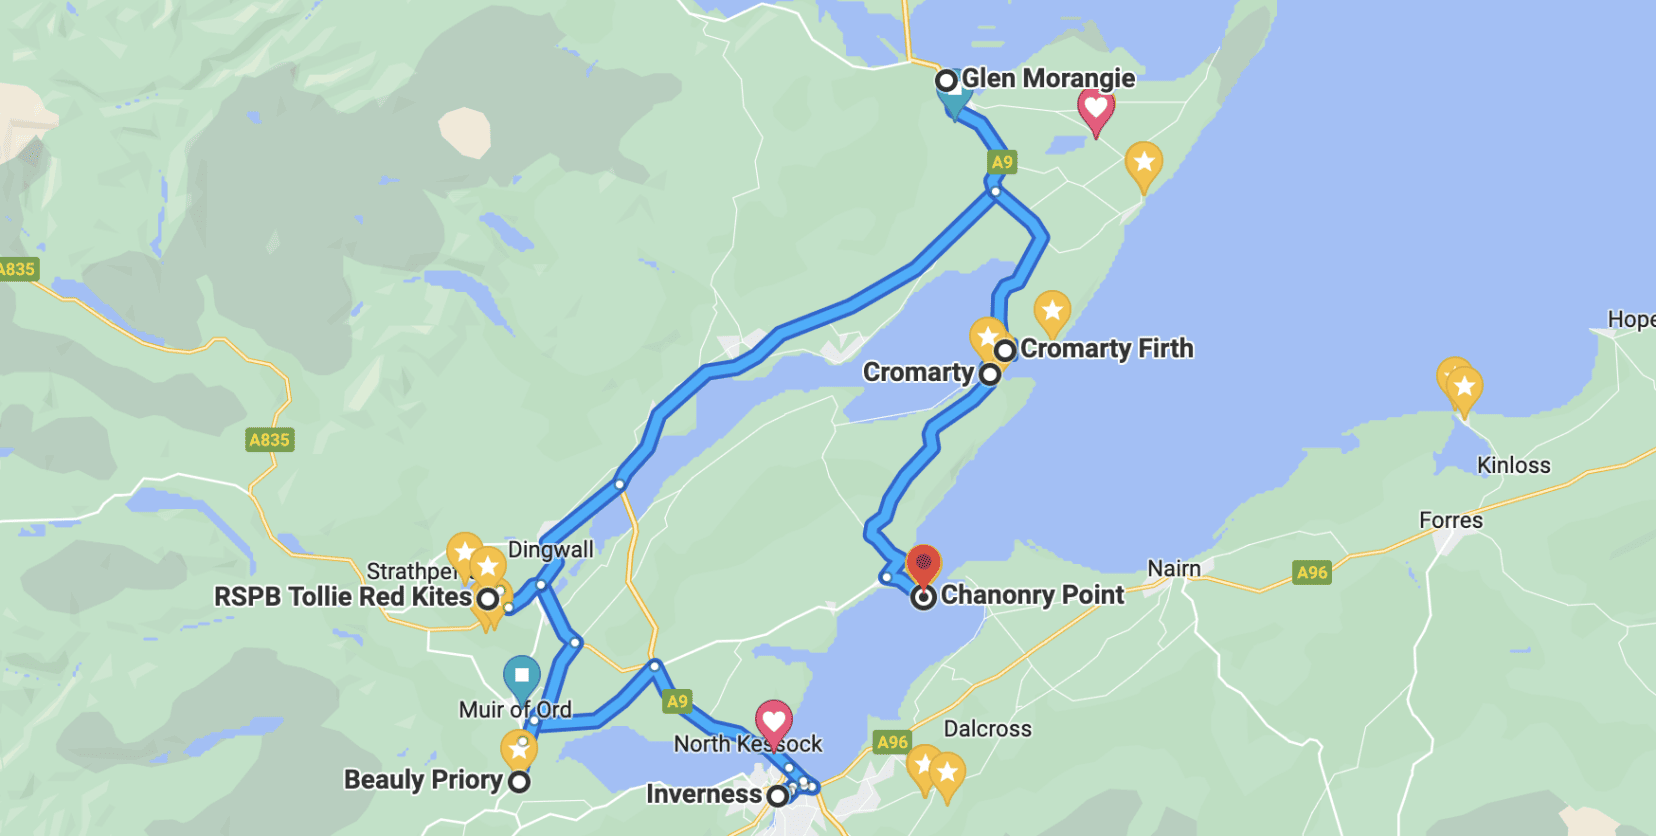 Road trip from inverness picture of Google map route 